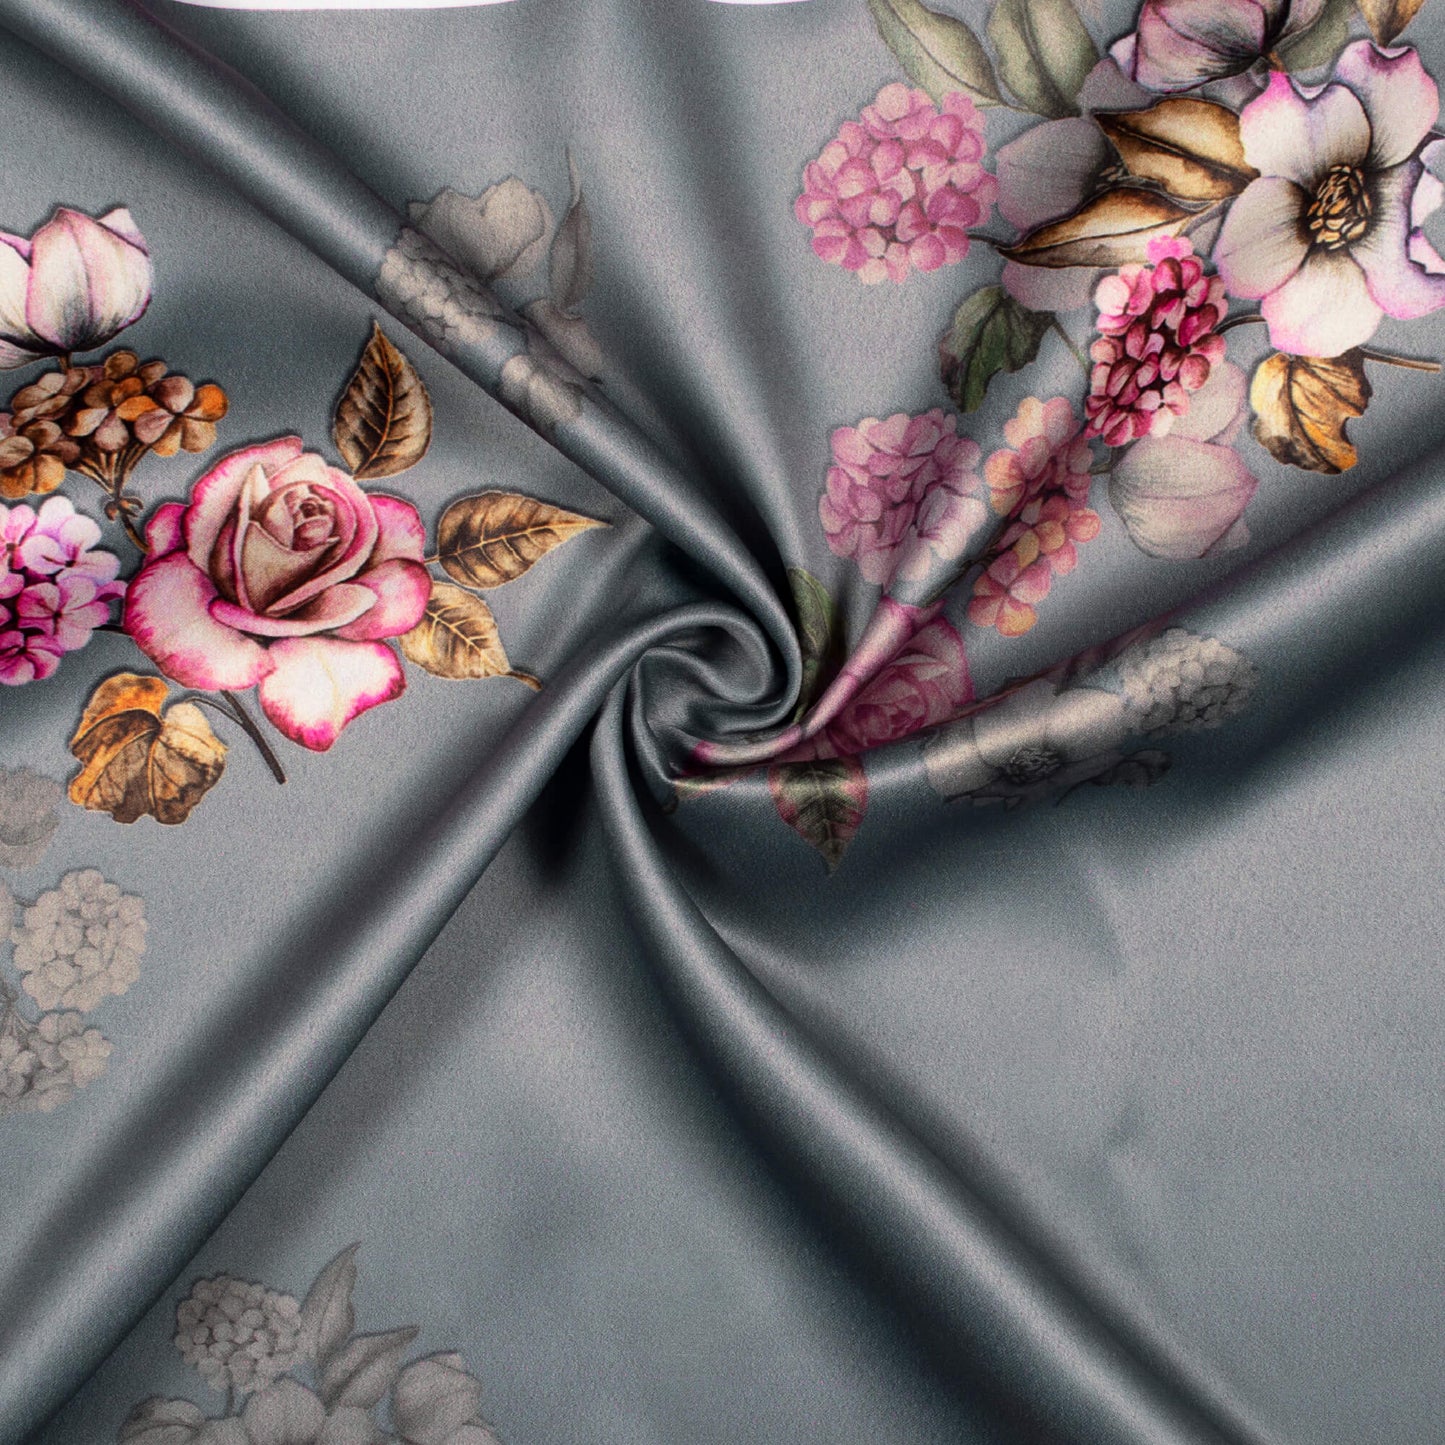 Steel Grey And Pale Pink Floral Pattern Digital Print Charmeuse Satin Fabric (Width 58 Inches)